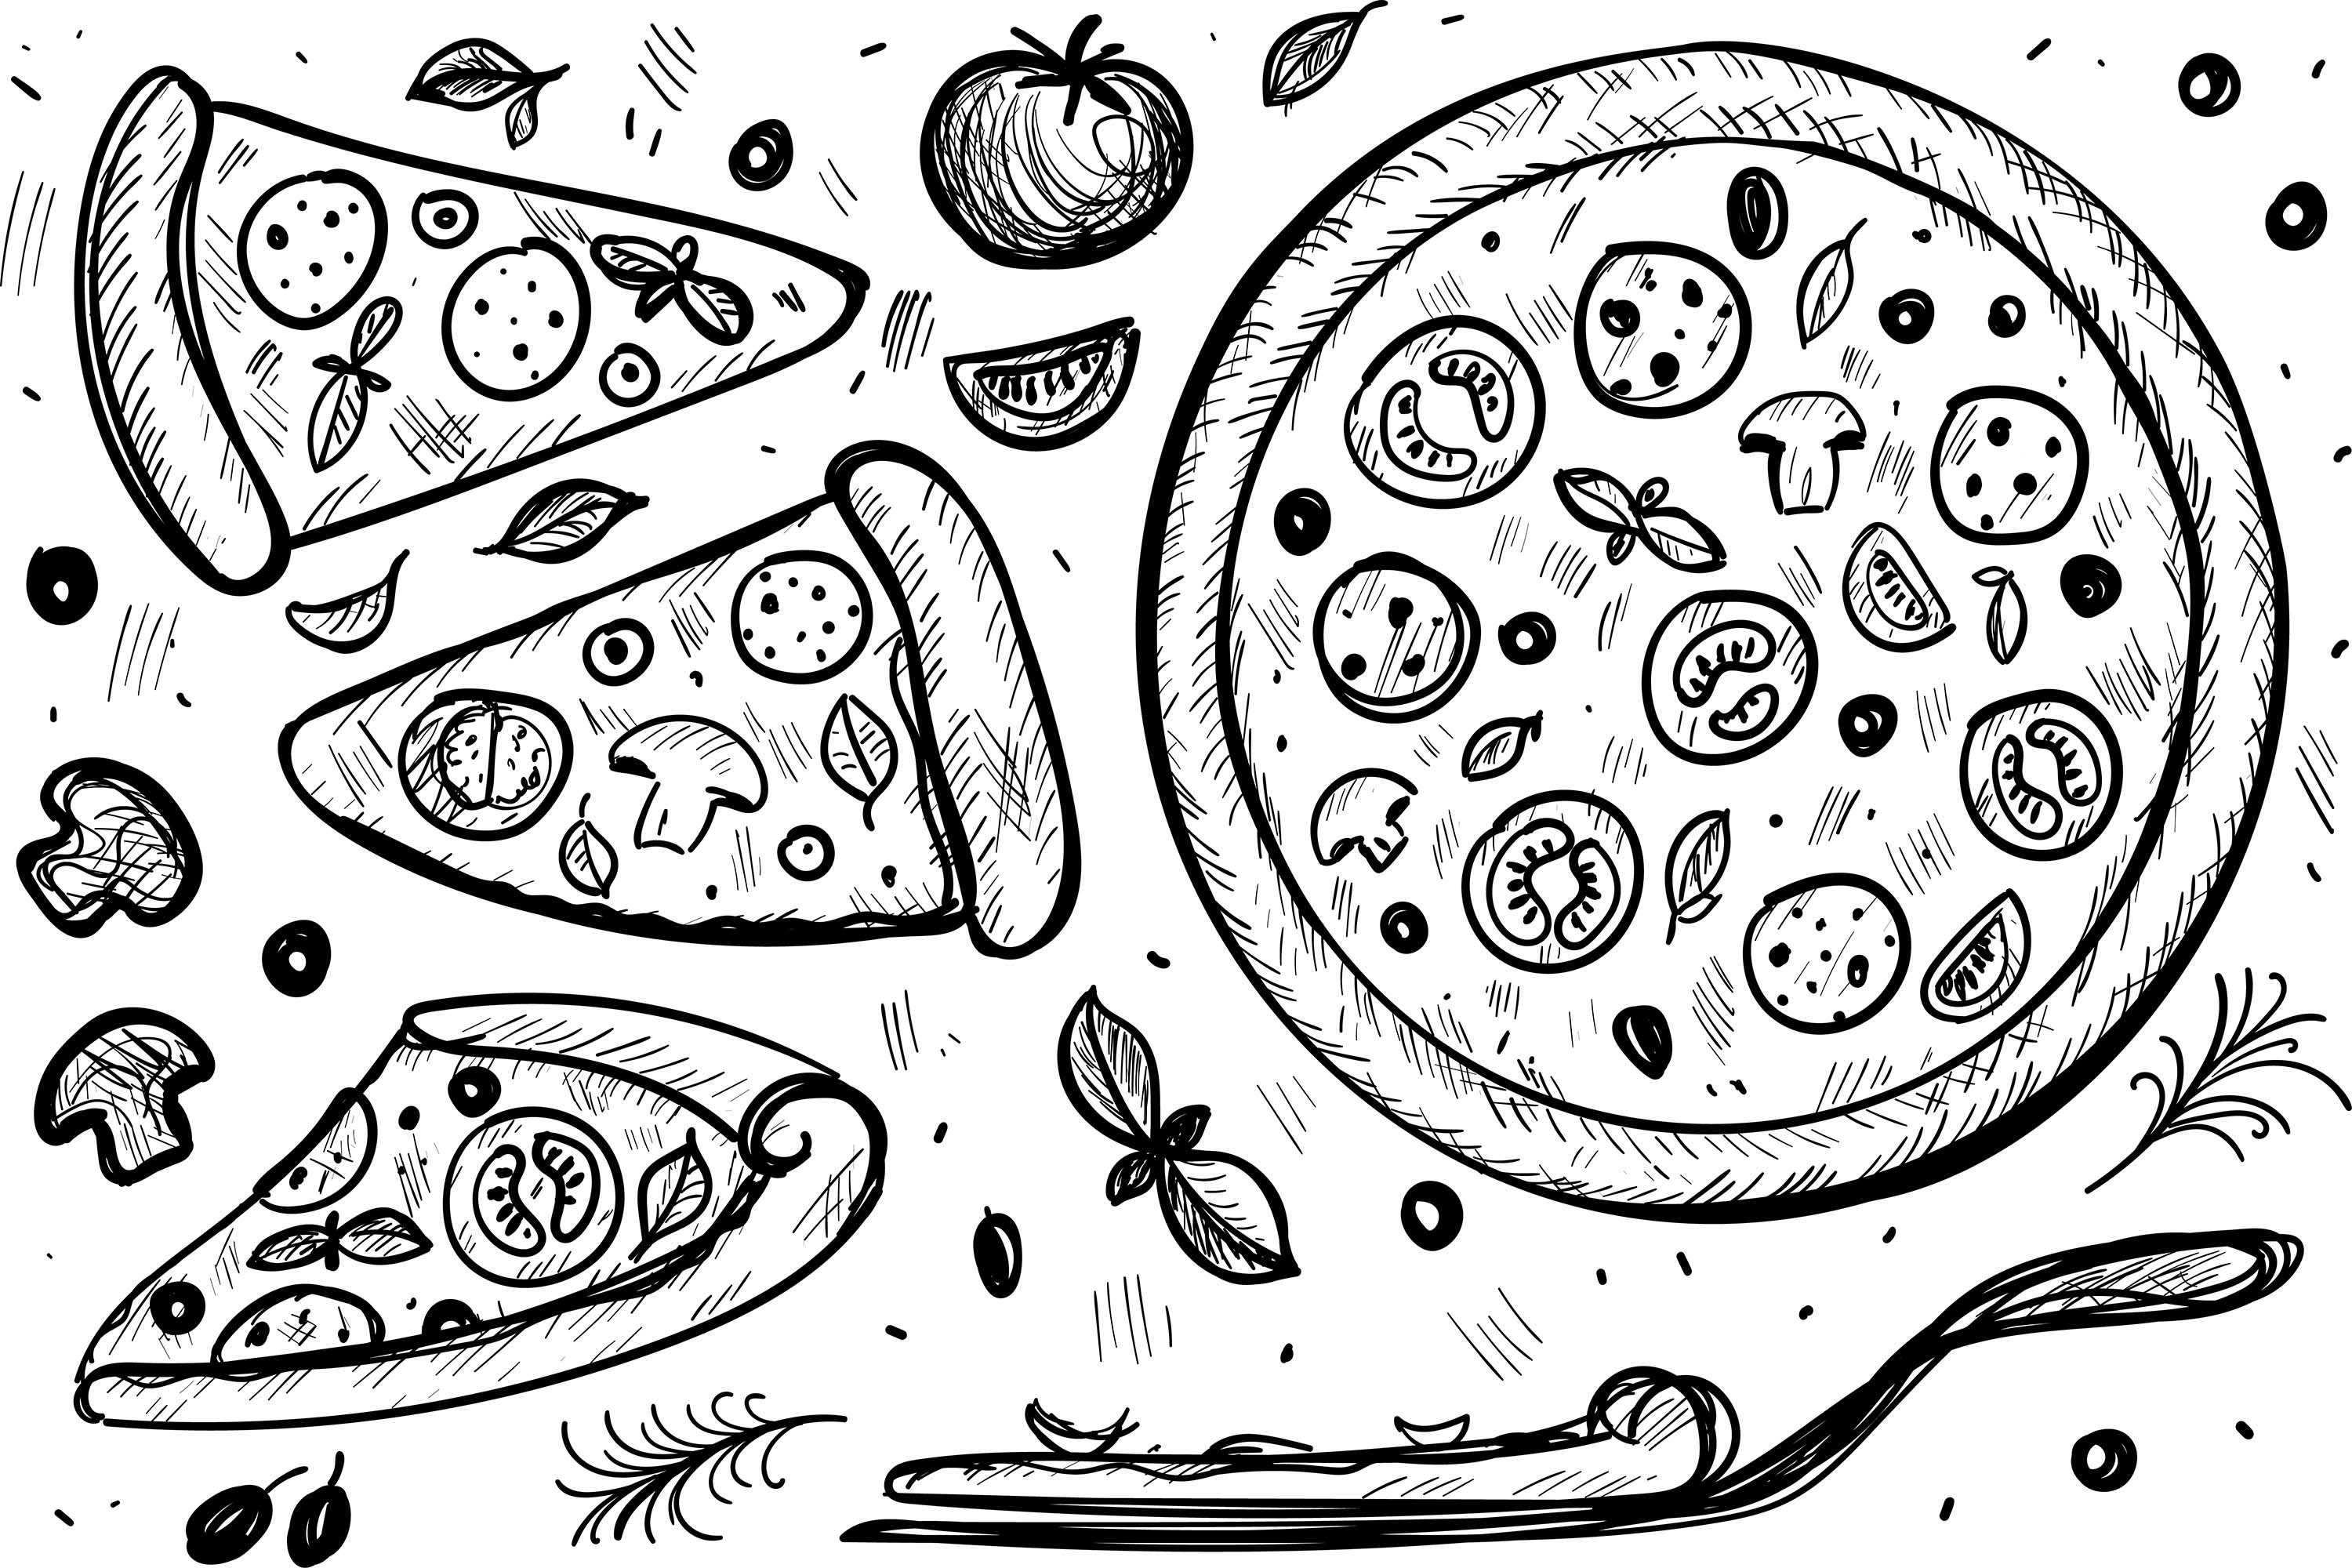 Black and white pizza image preview.